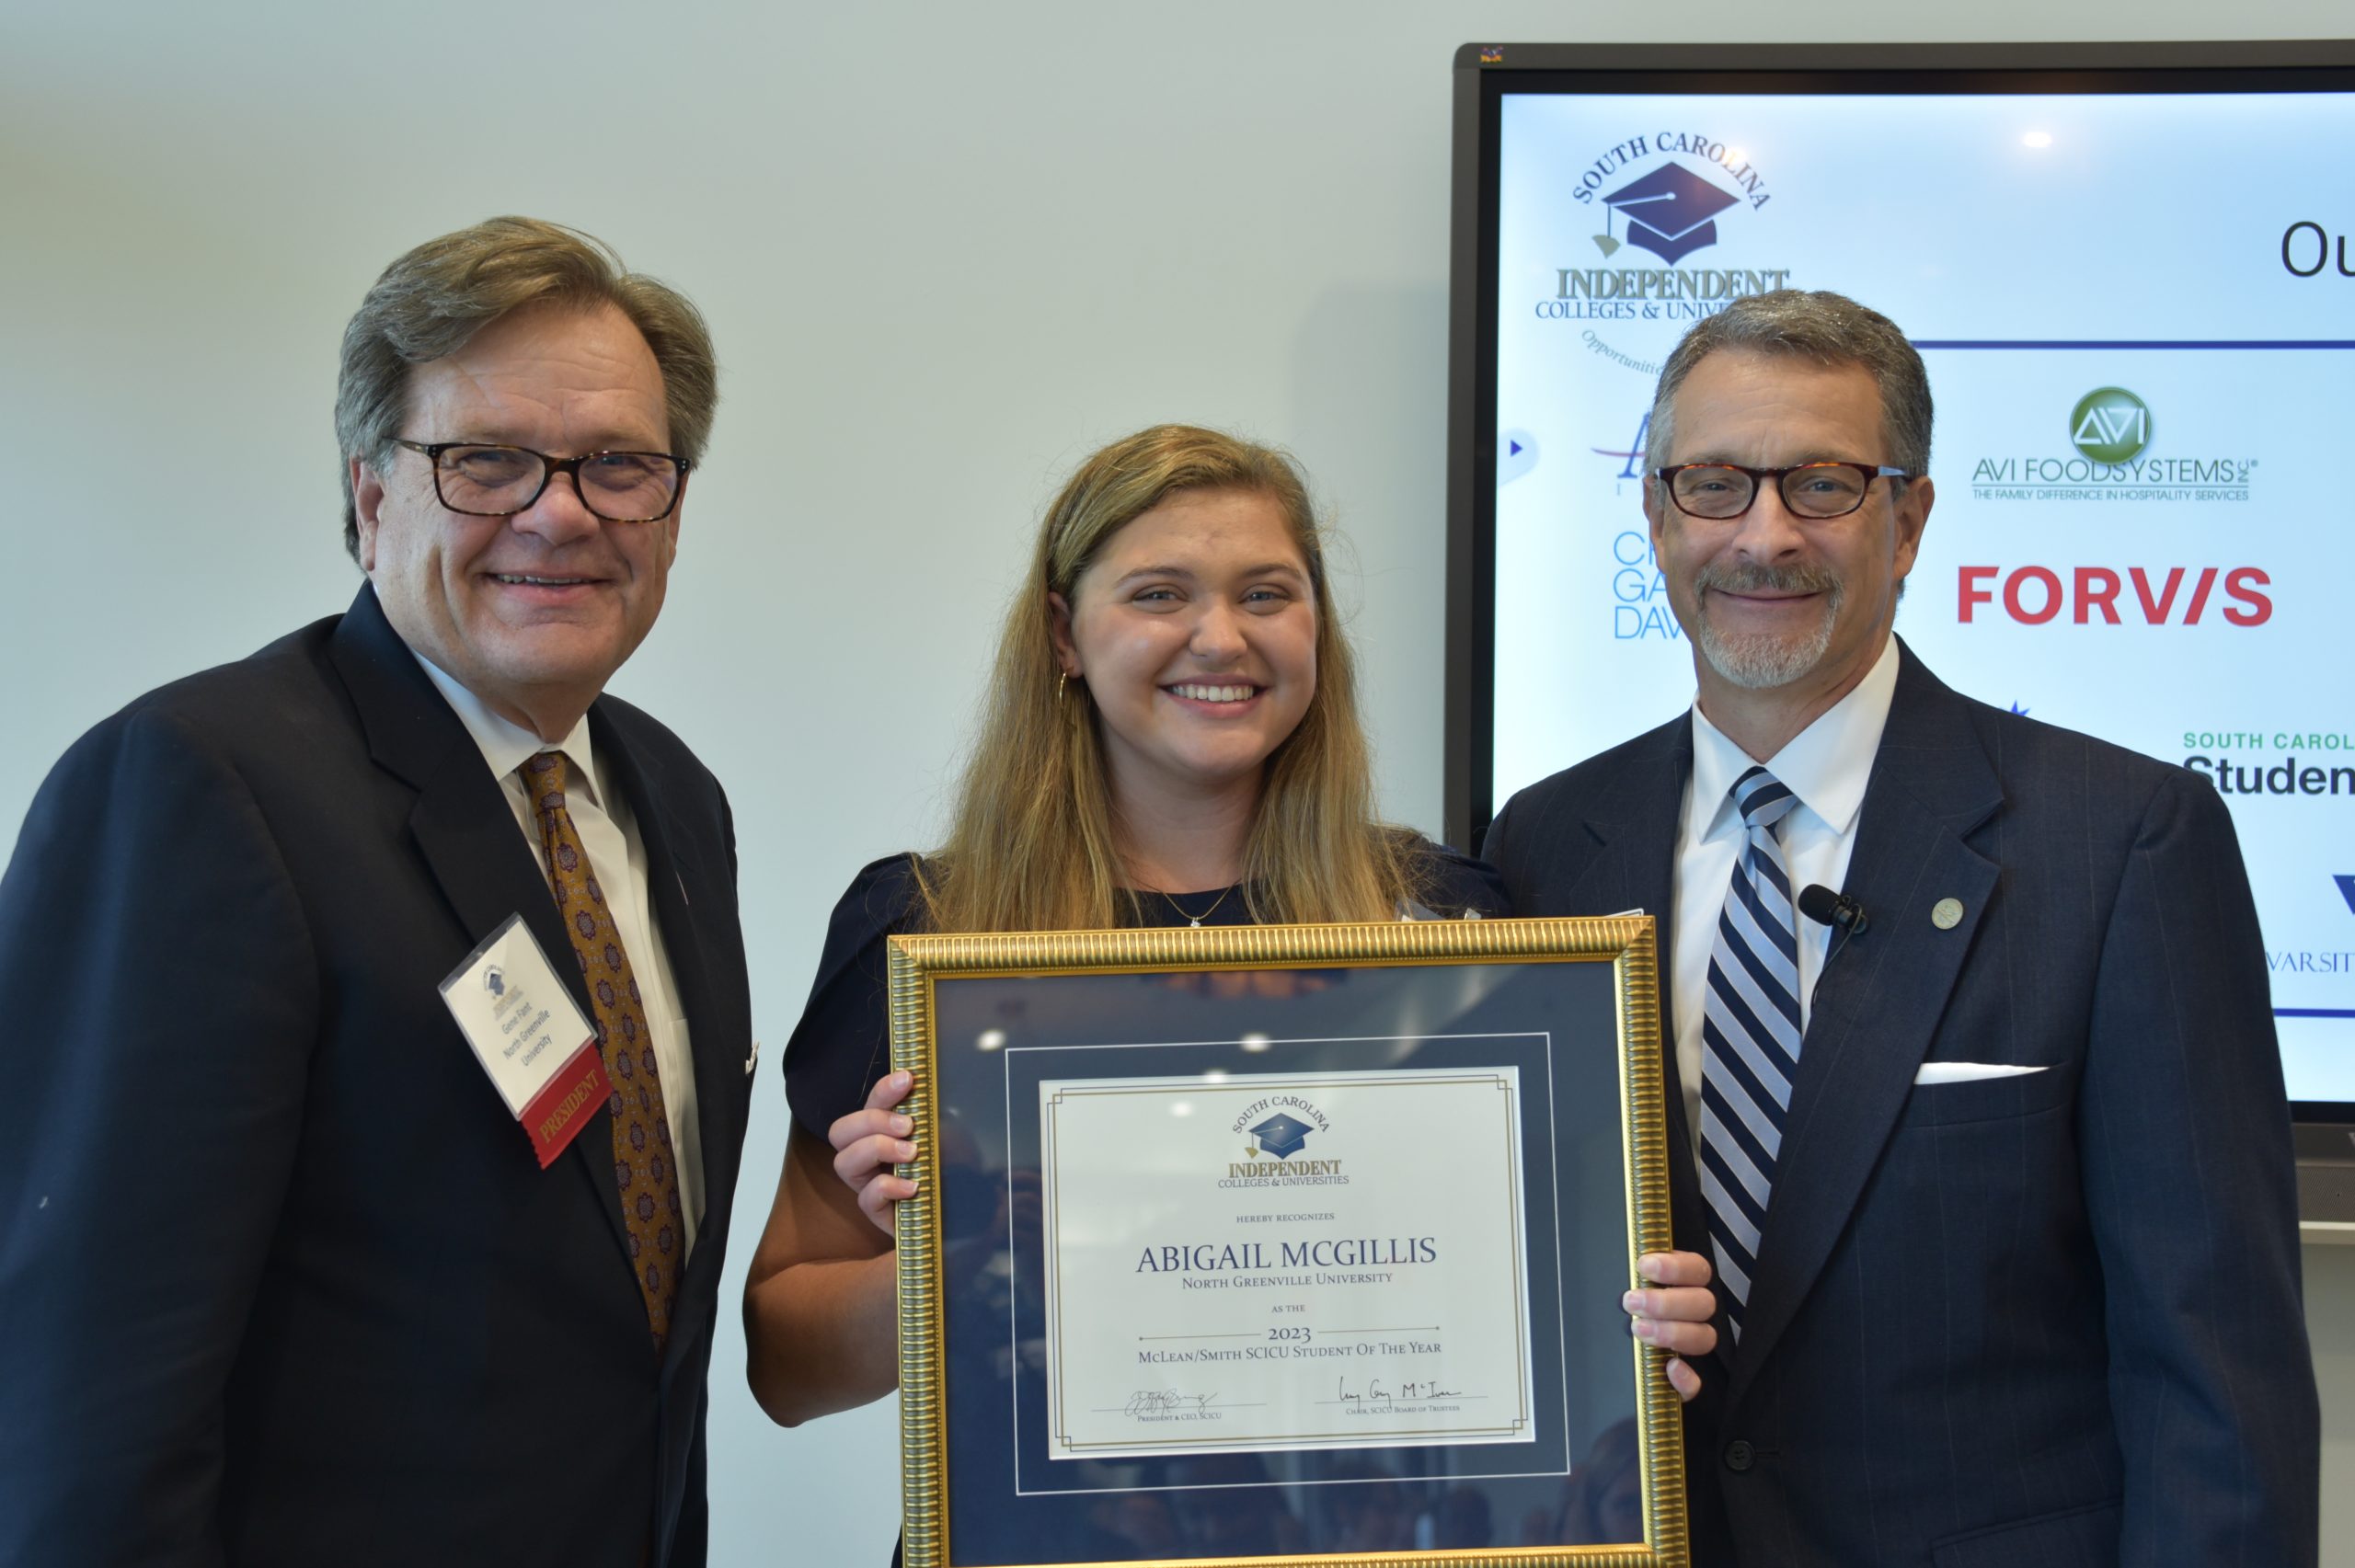 Abigail McGillis, a senior education major at North Greenville University, is the 2023 McLean-Smith SCICU Student of the Year.